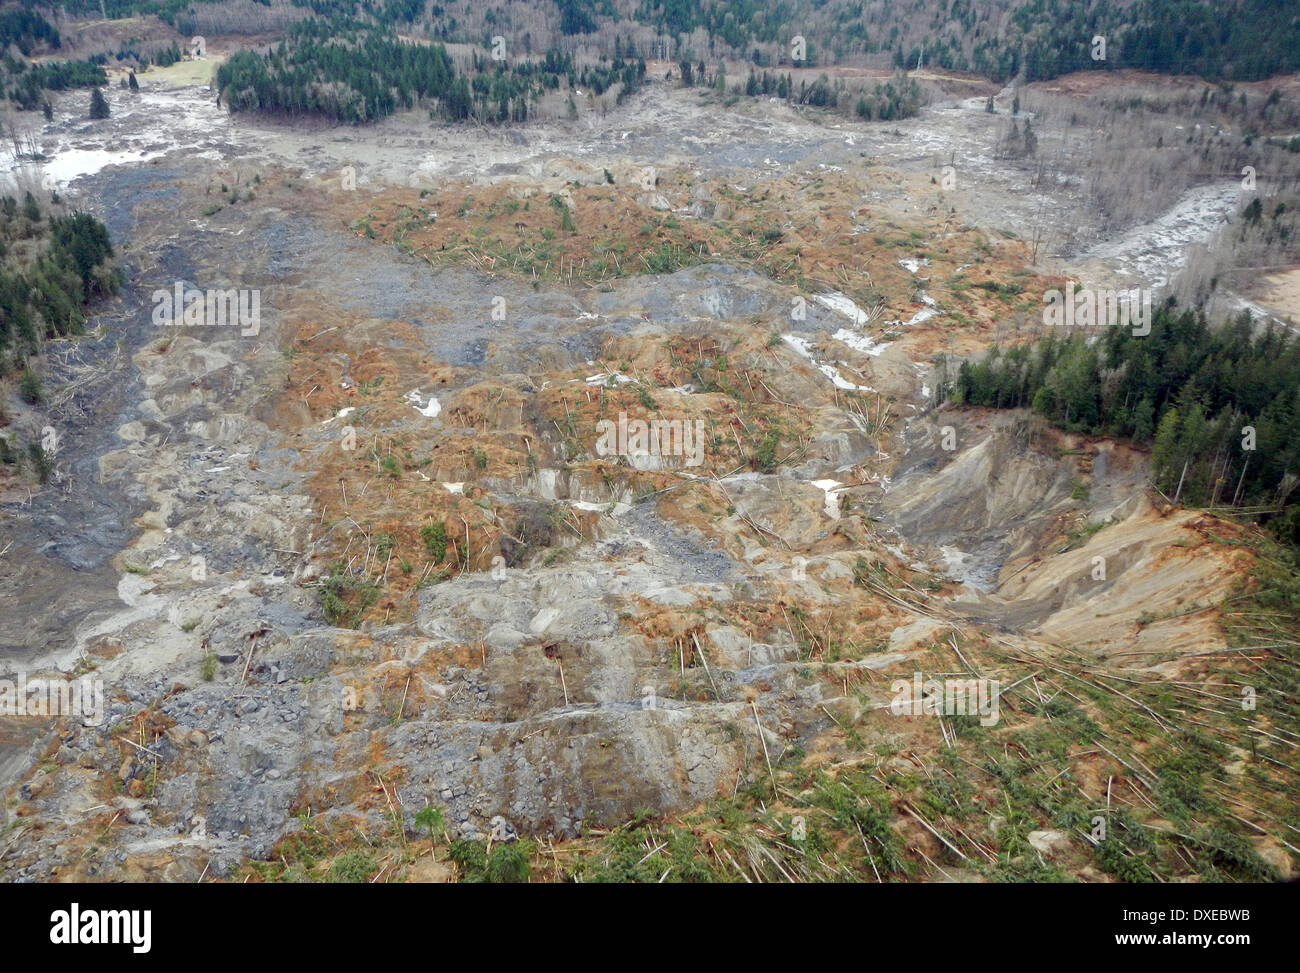 Aerial view of the landslide that blocked the Stillaguamish River burying State Route 530 and causing a massive mudslide killing at least fourteen people and destroying a small riverside village in northwestern Washington state March 22, 2014 in Oso, Washington. Officials report that 176 people are still missing and feared dead. Stock Photo